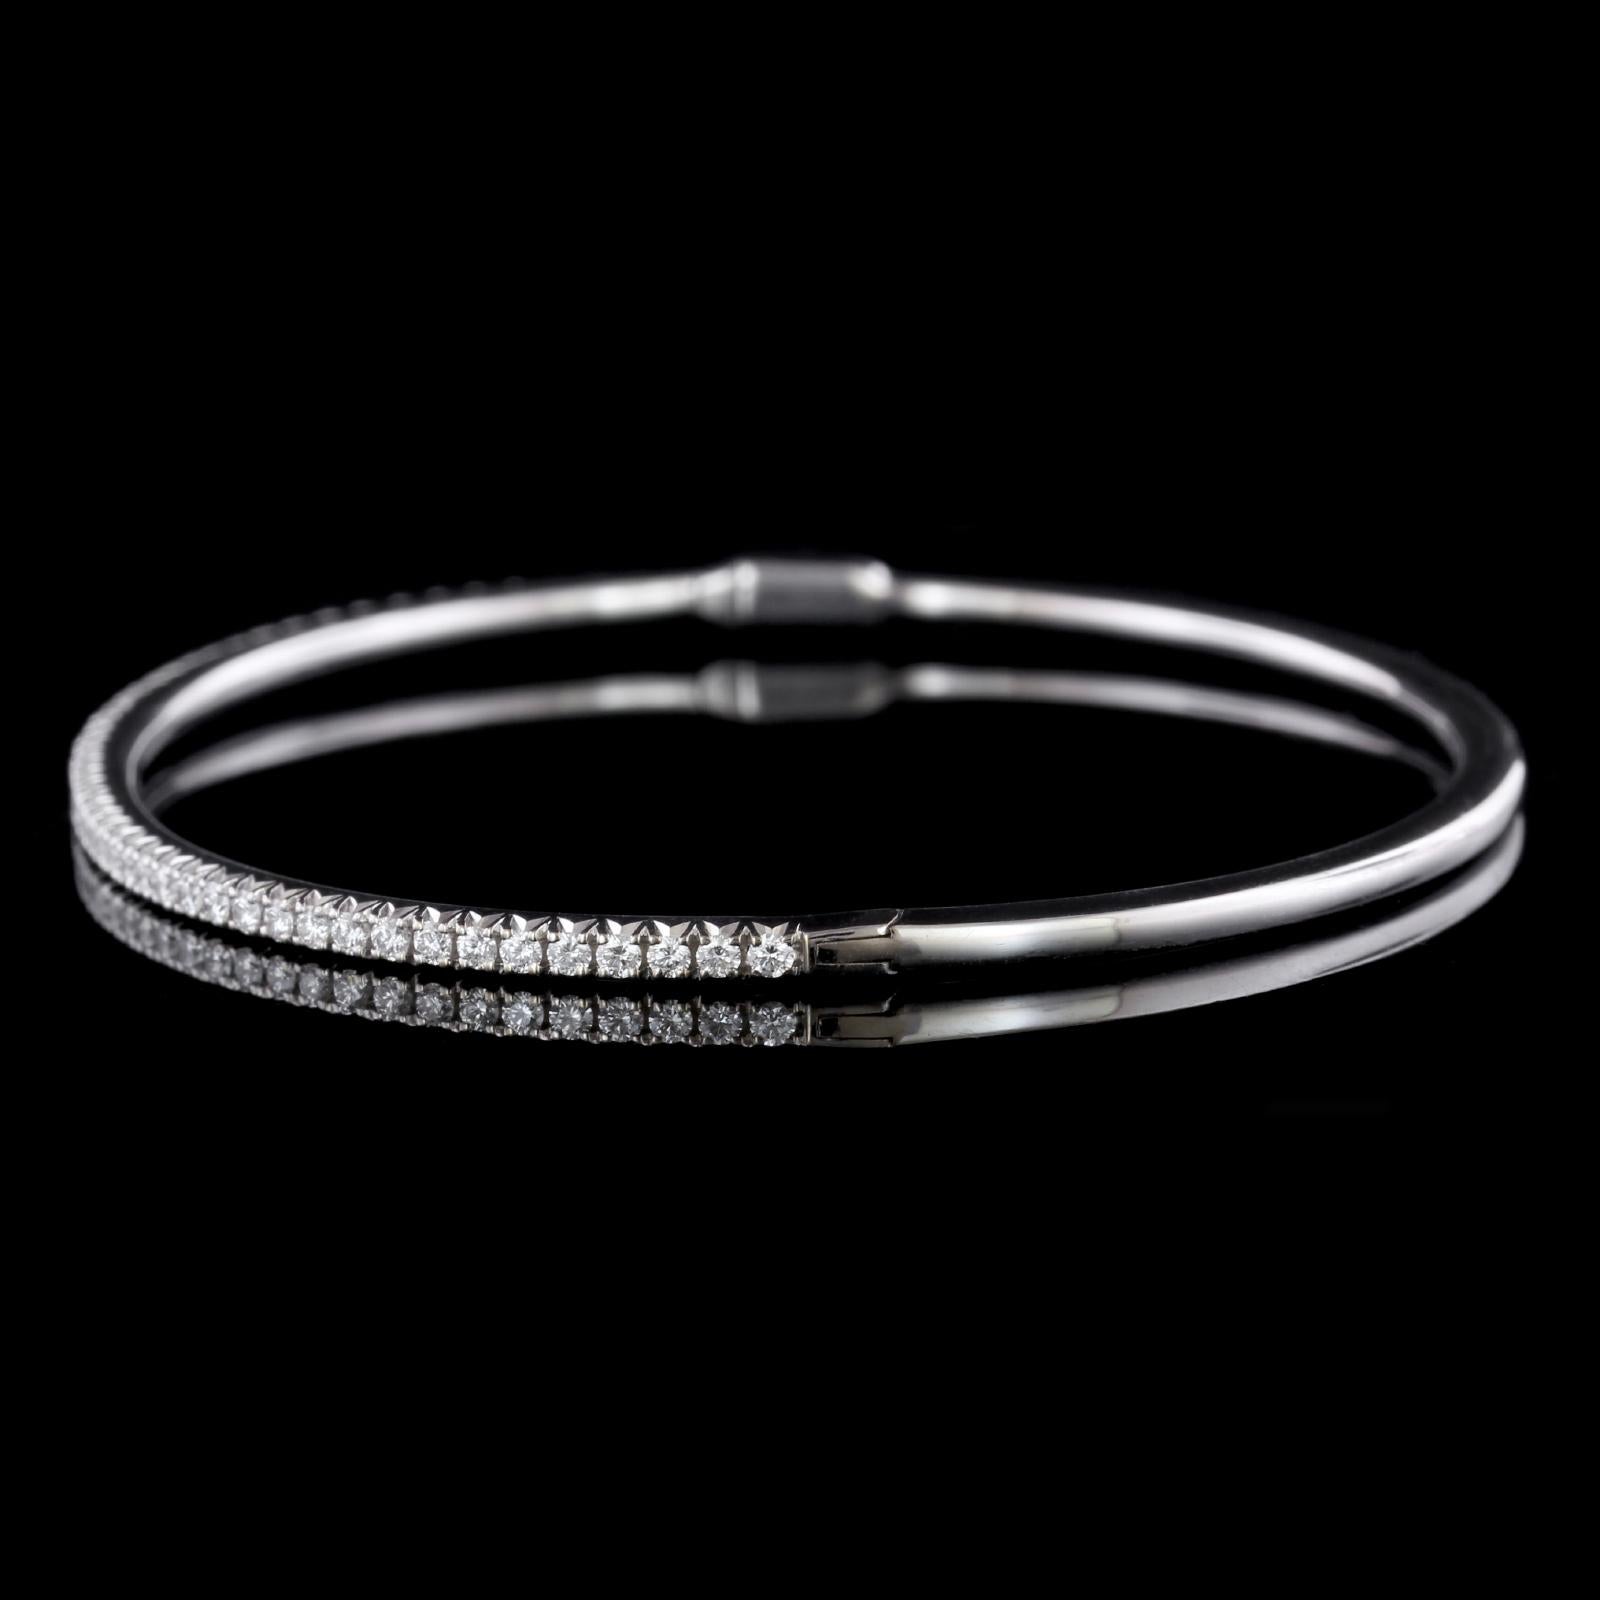 Tiffany & Co. 18K White Gold Metro Diamond Bangle. The bracelet is a hinged
bangle set with 17 full cut diamonds weighing .73cttw., G color, VS clarity, interior
circumference 7